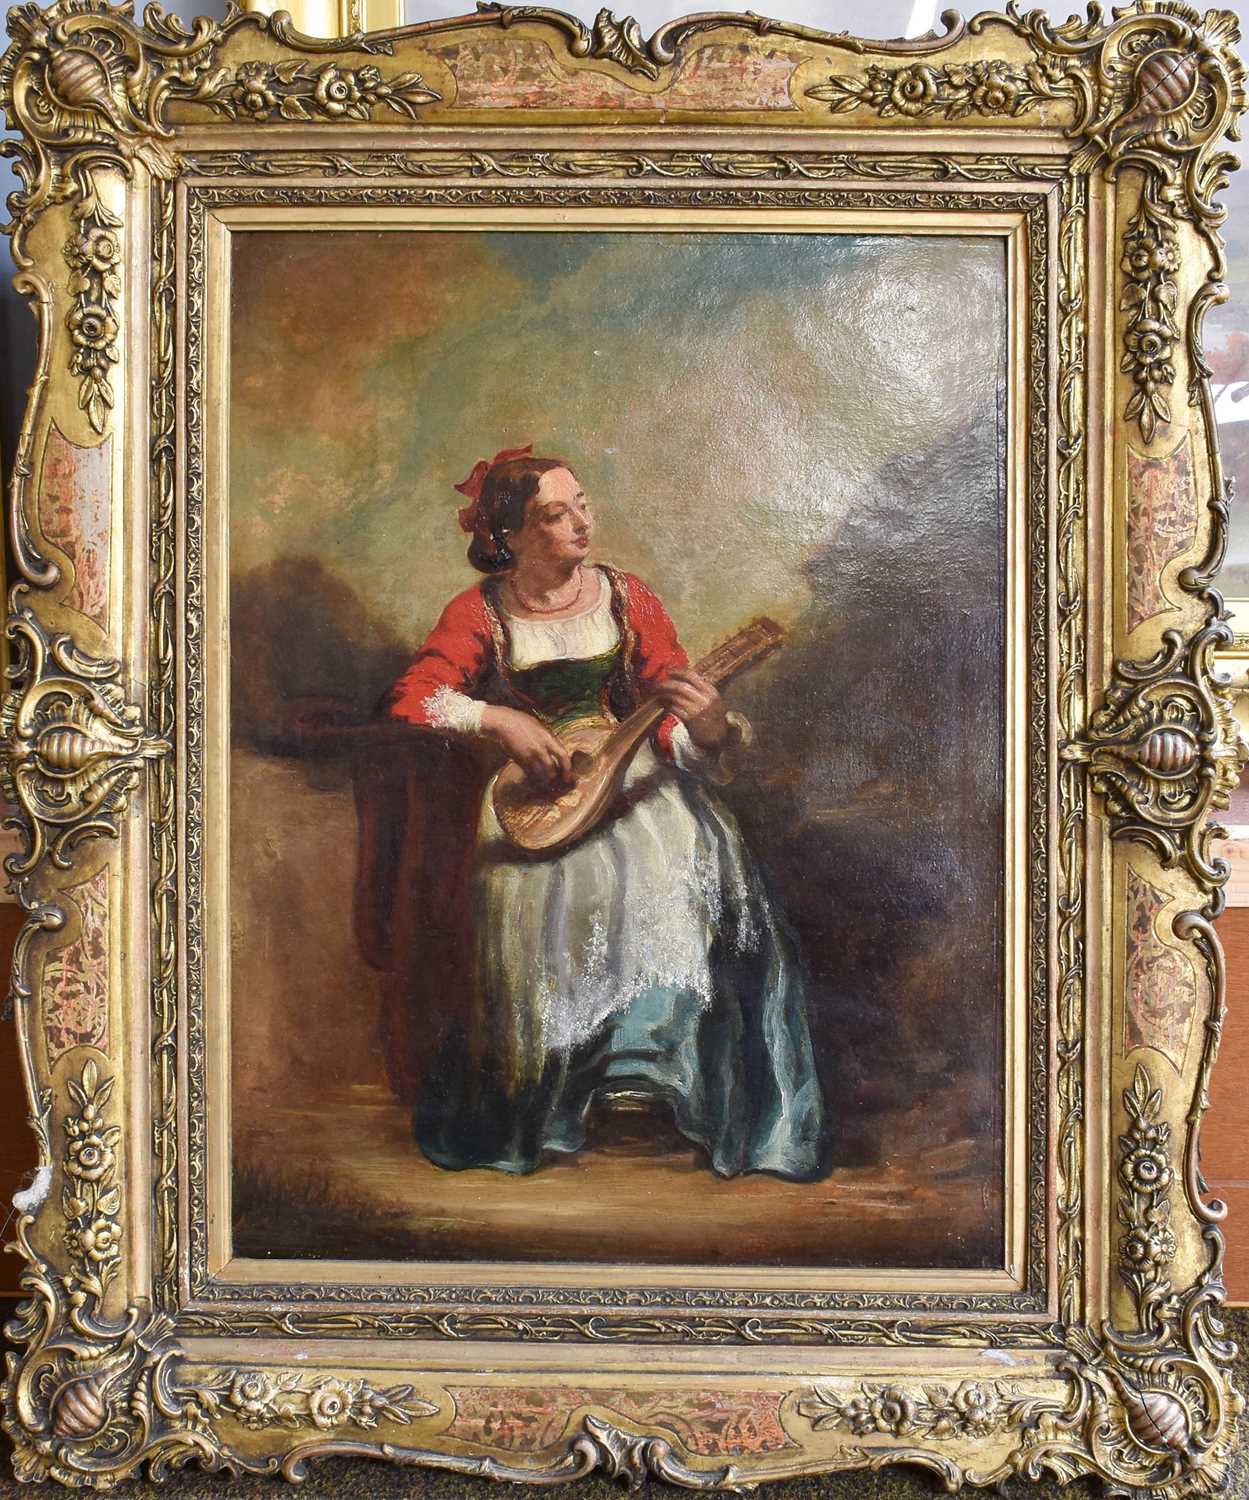 Continental School (19th Century) Serenade on the mandolin Oil on canvas, 60cm by 45cm - Image 2 of 2